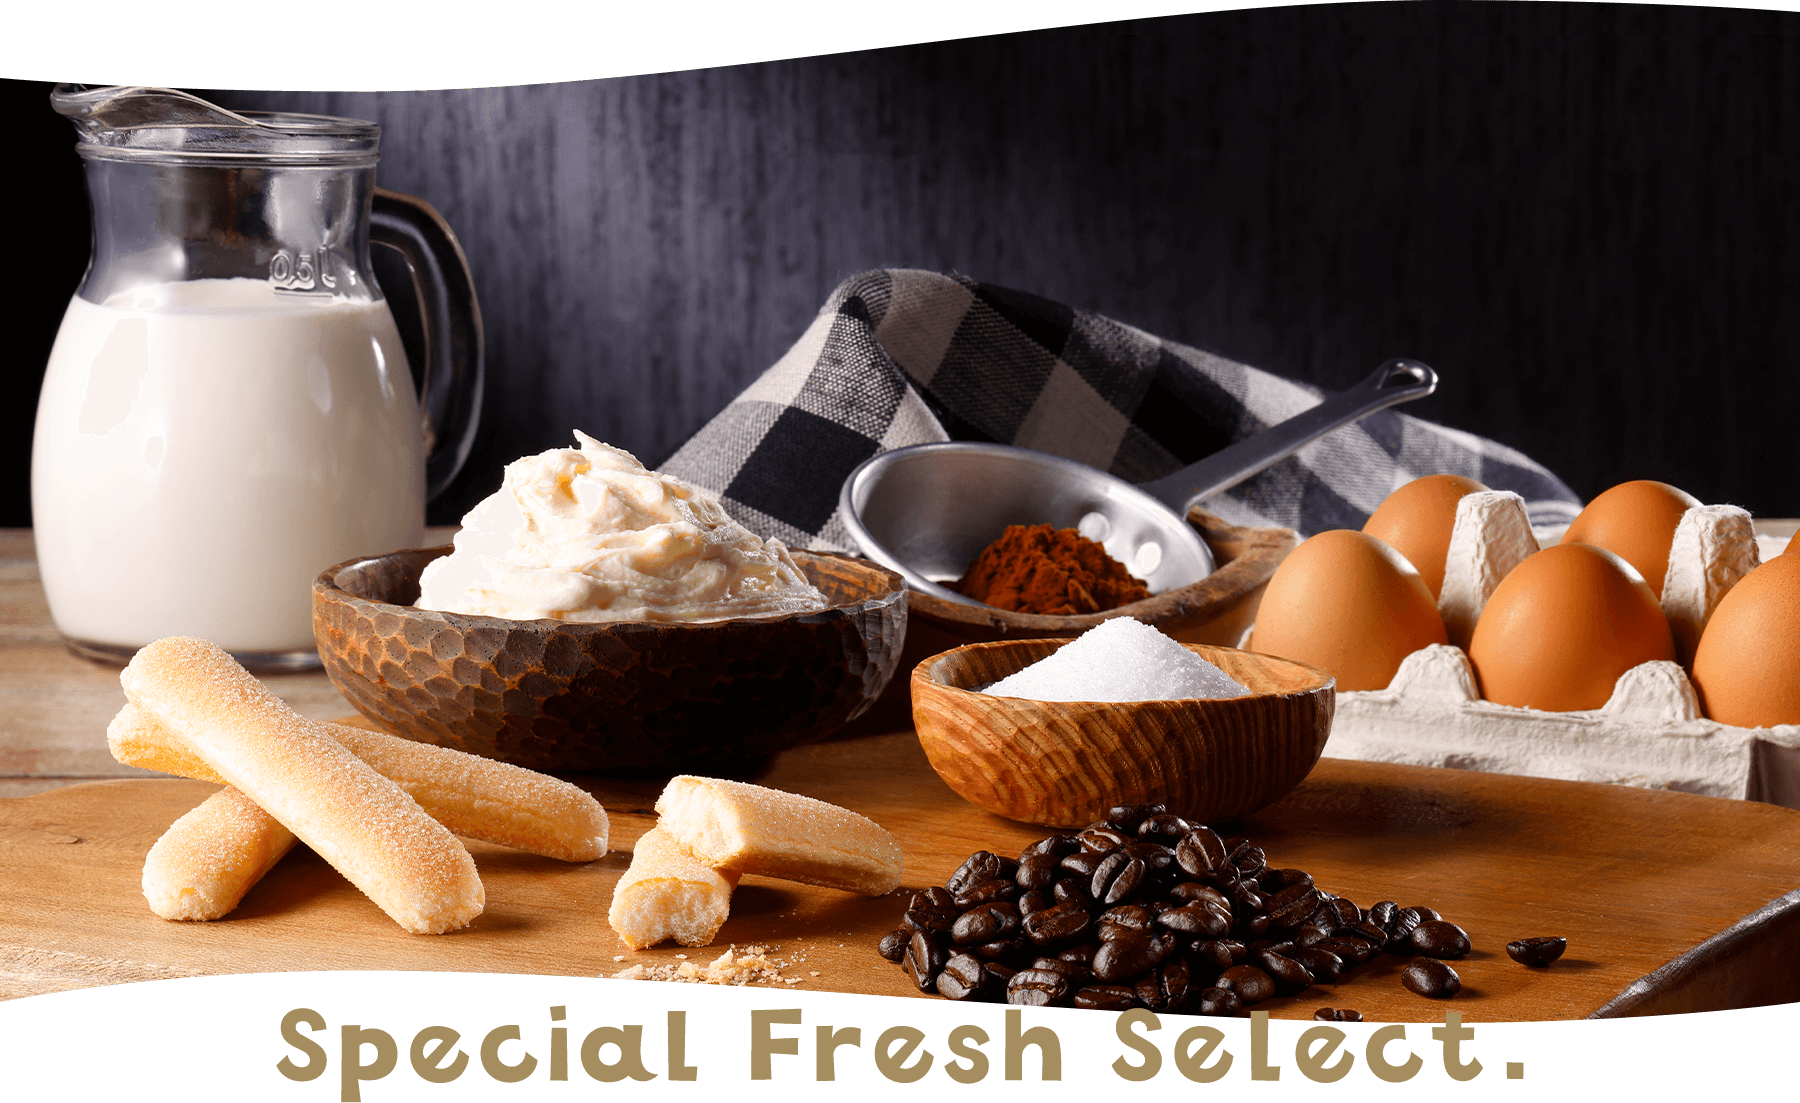 Special Fresh select.